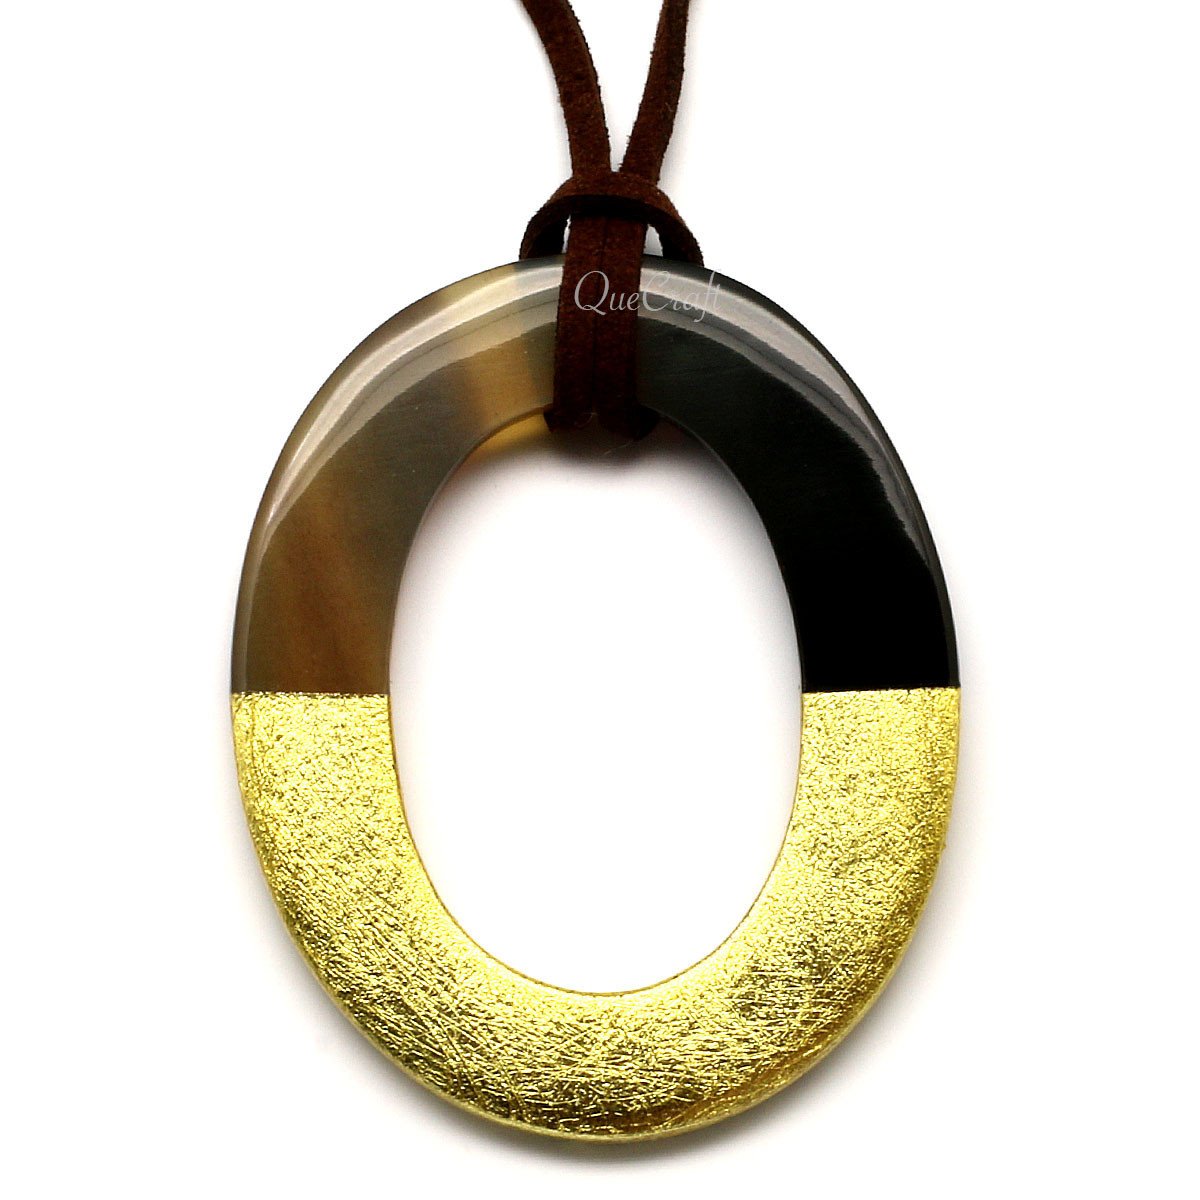 Horn & Lacquer Pendant #5999 - HORN JEWELRY